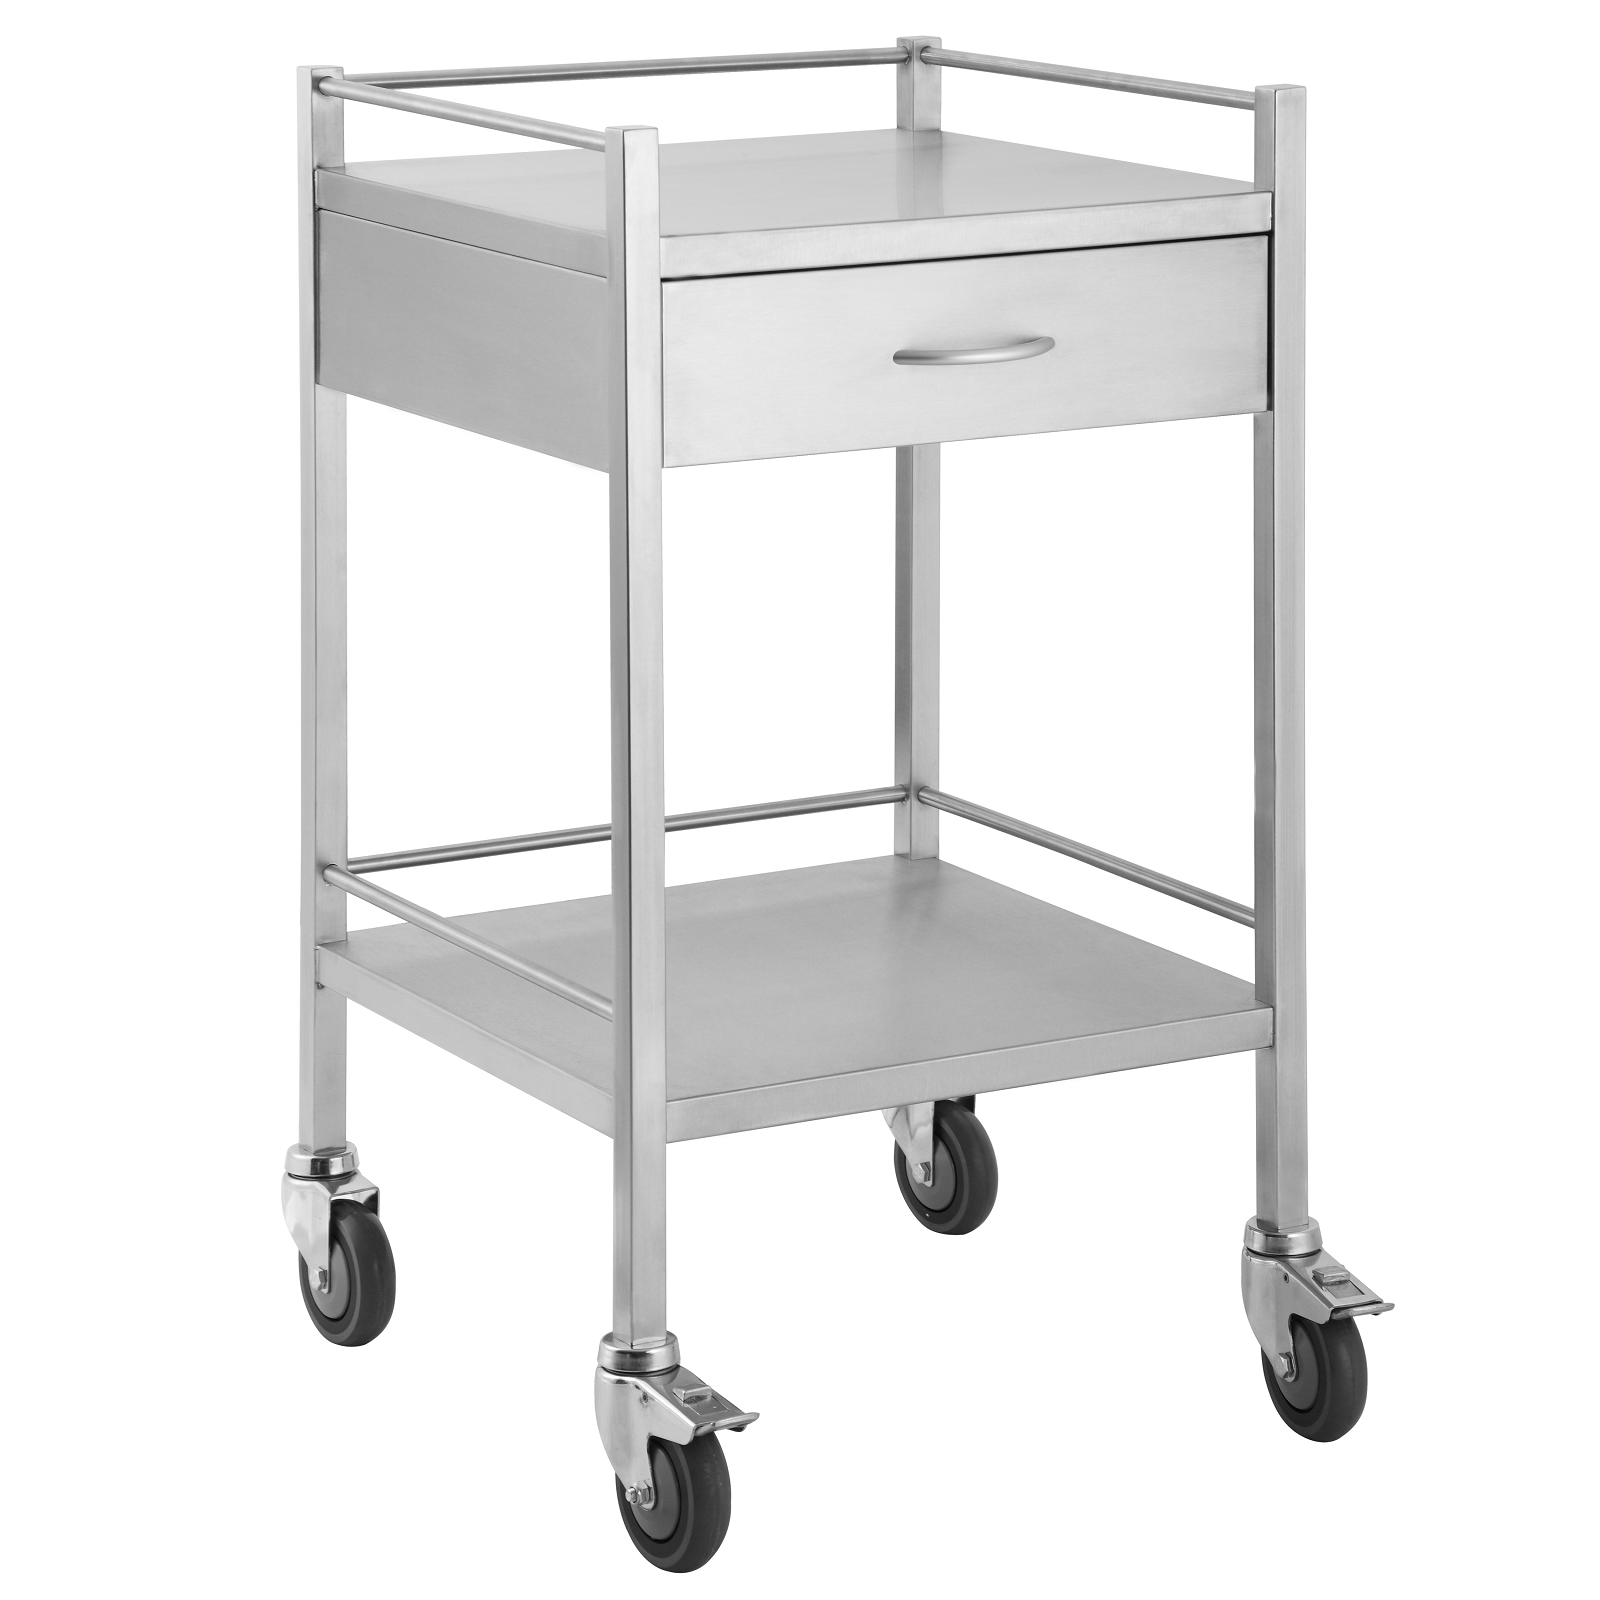 A high grade single drawer stainless steel trolley with smooth rolling castors, shelf, rails and an outstanding finish.